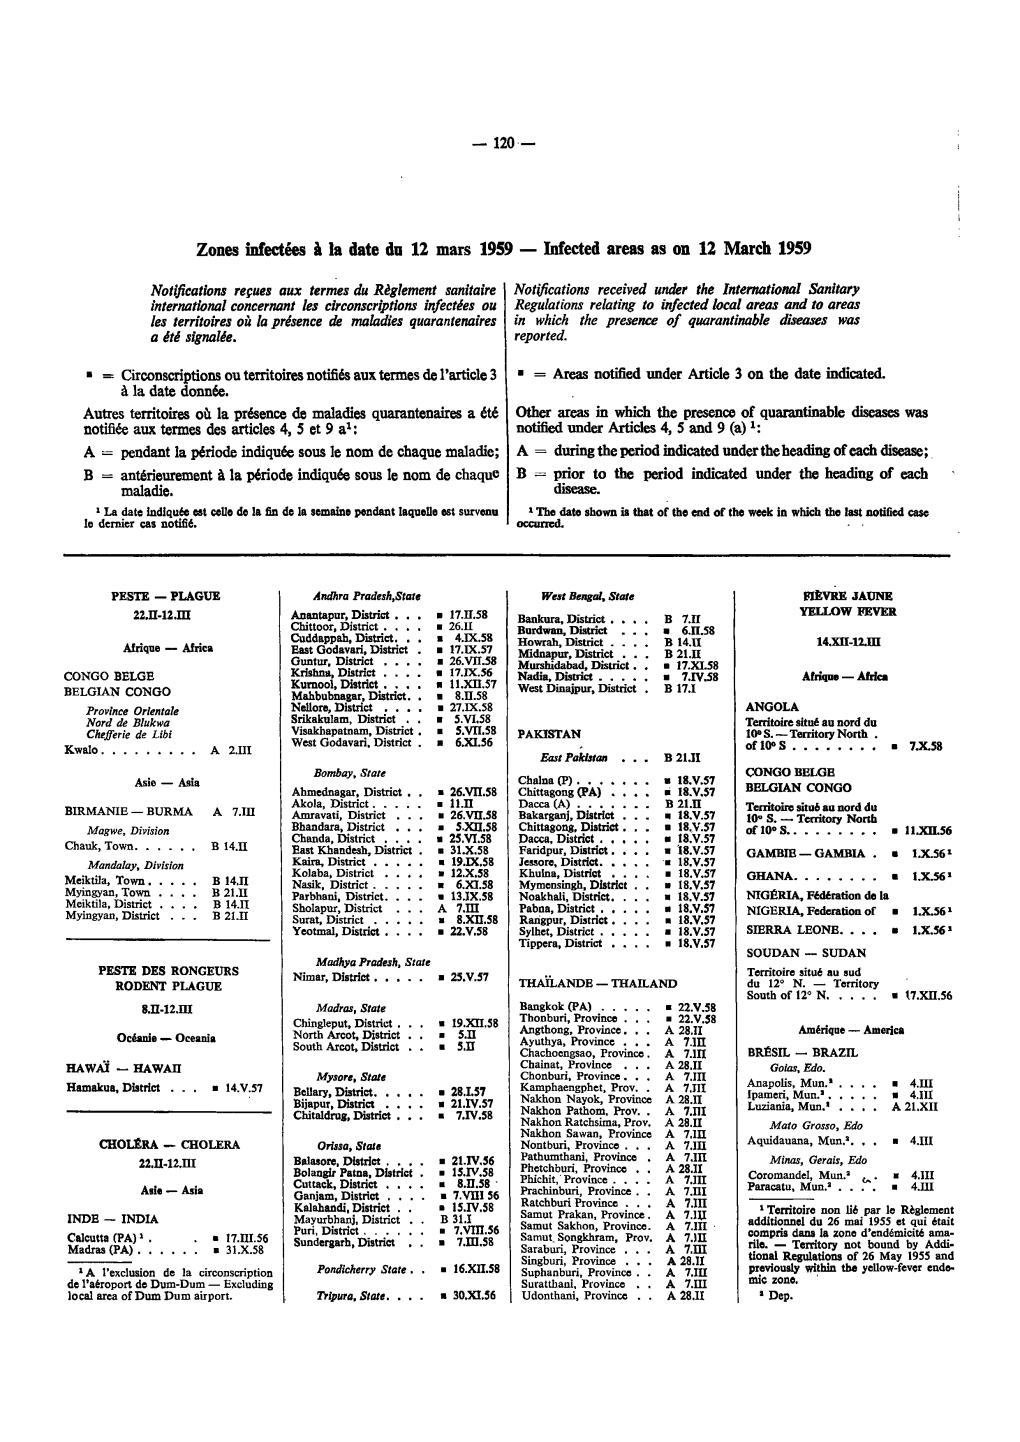 Zones Infectées À La Date Dn 12 Mars 1959 — Infected Areas As on 12 March 1959